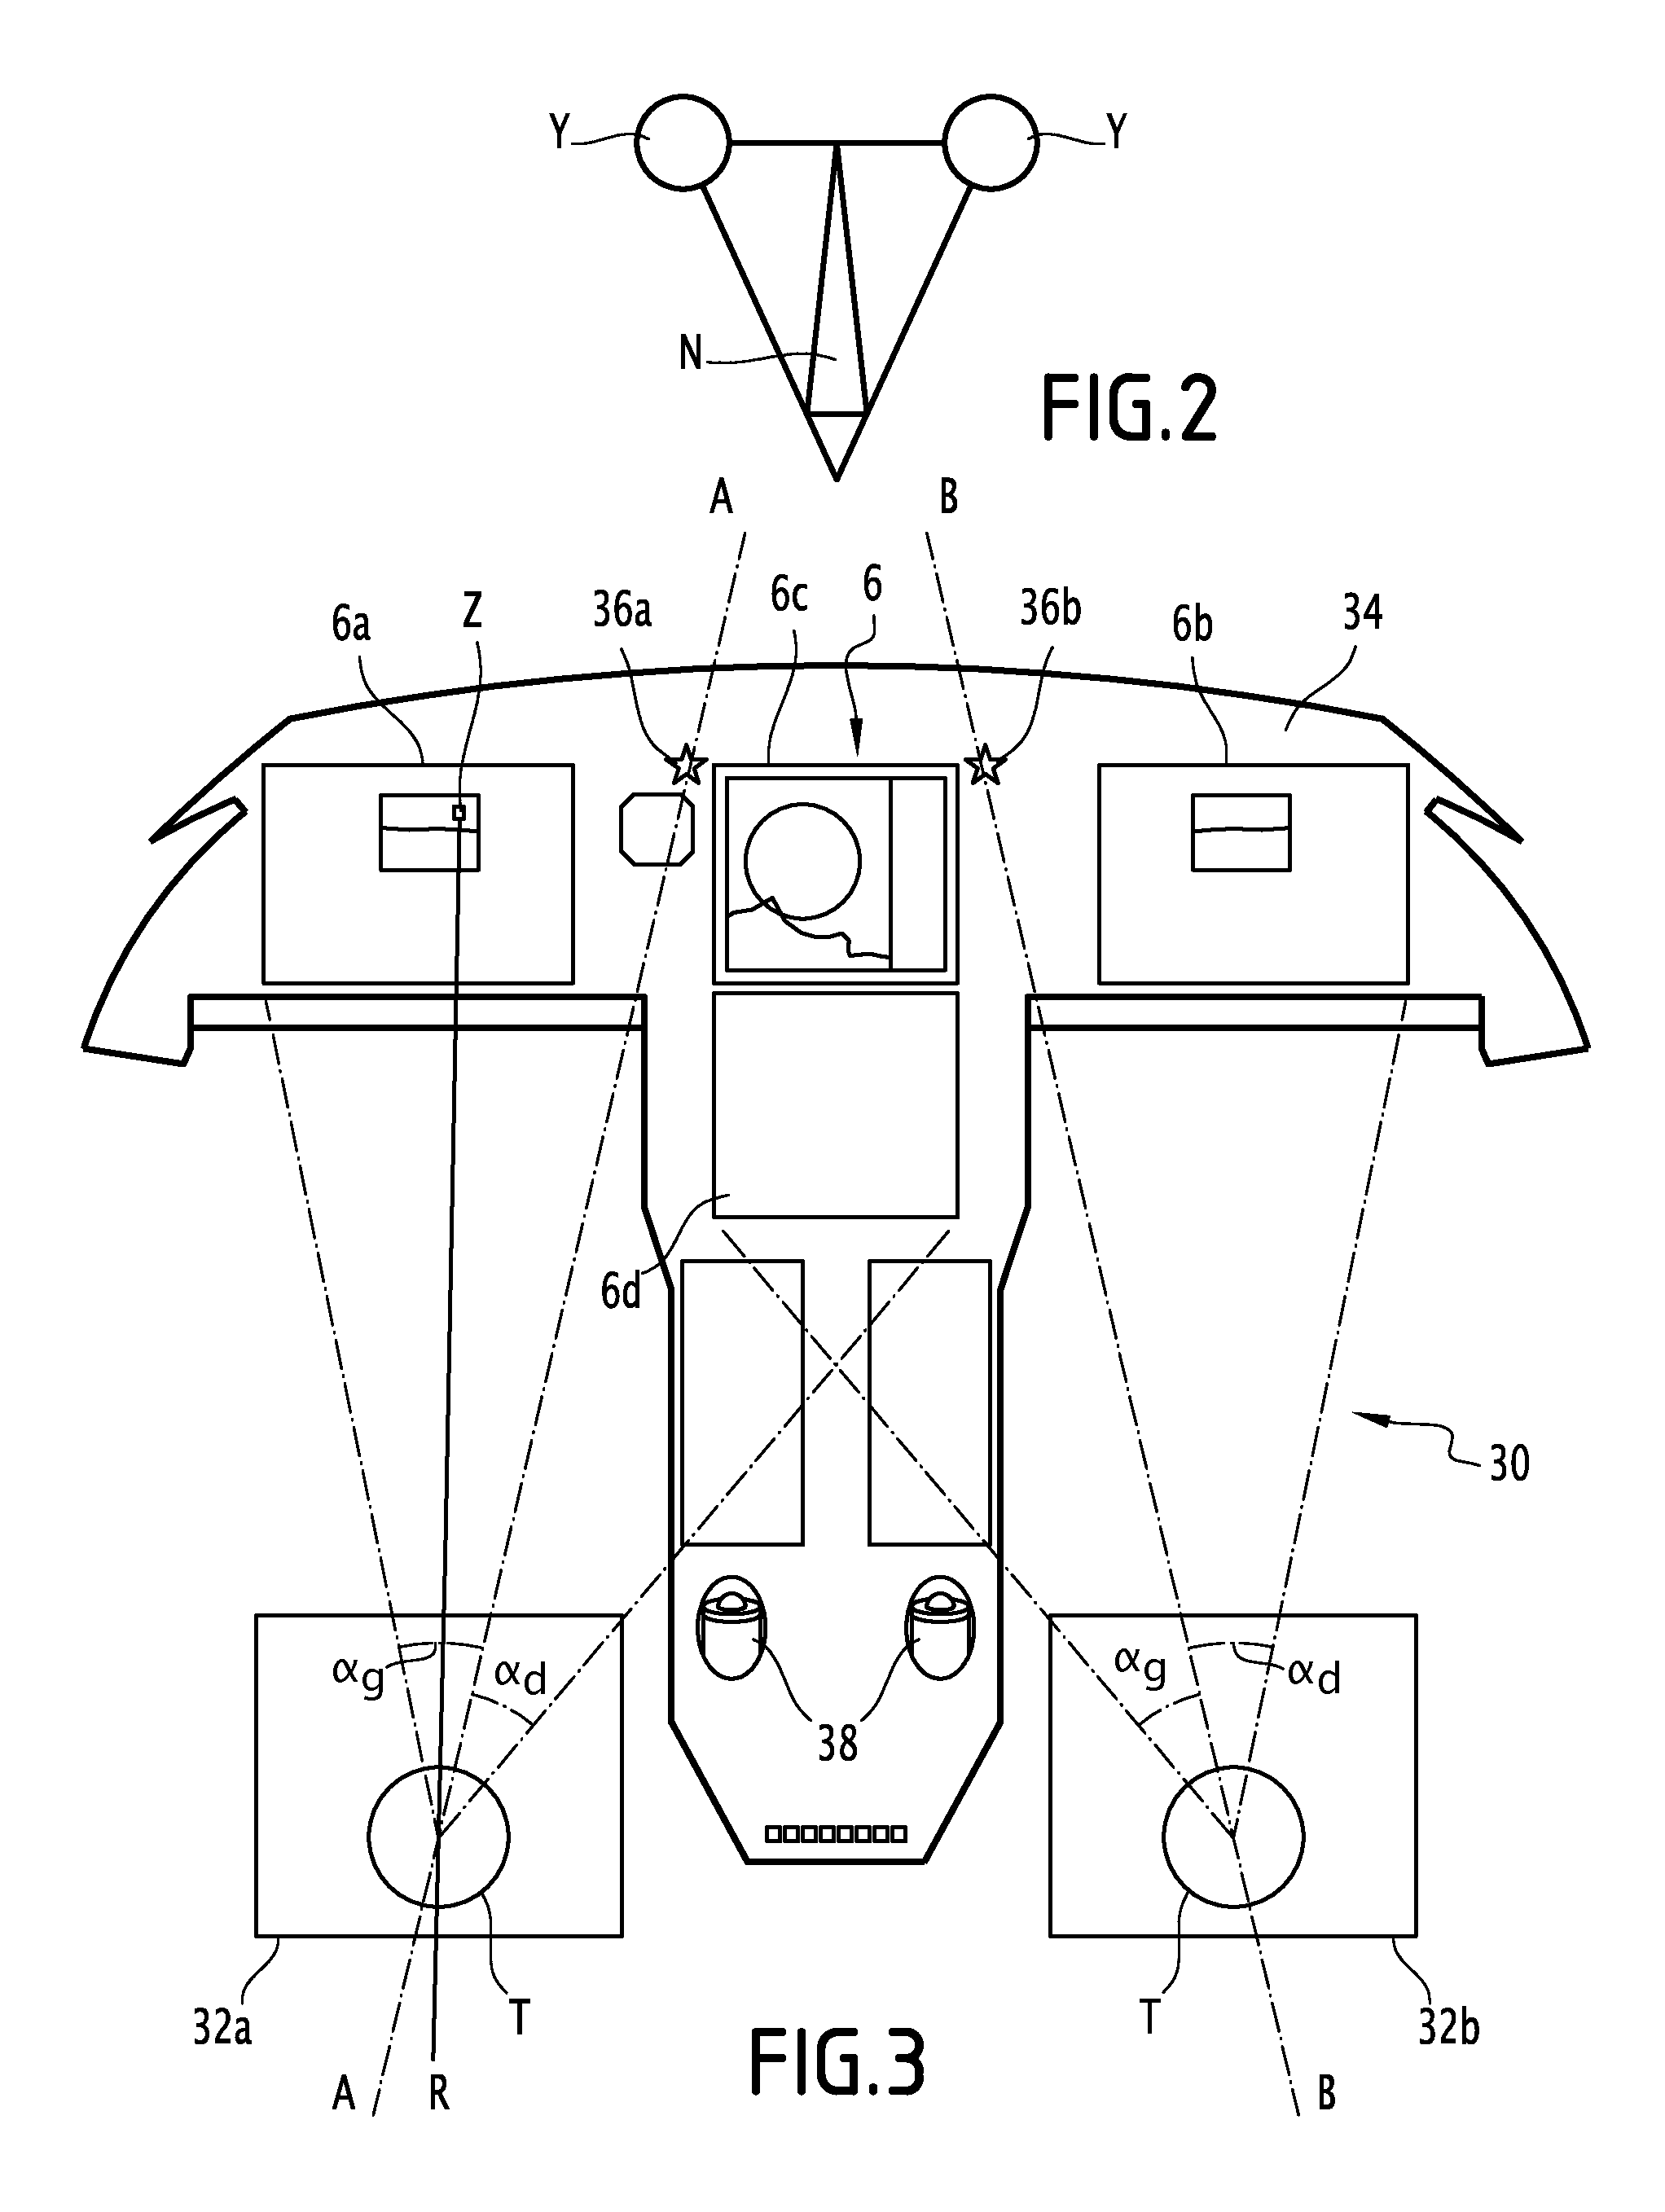 System and method for controlling the position of a movable object on a viewing device